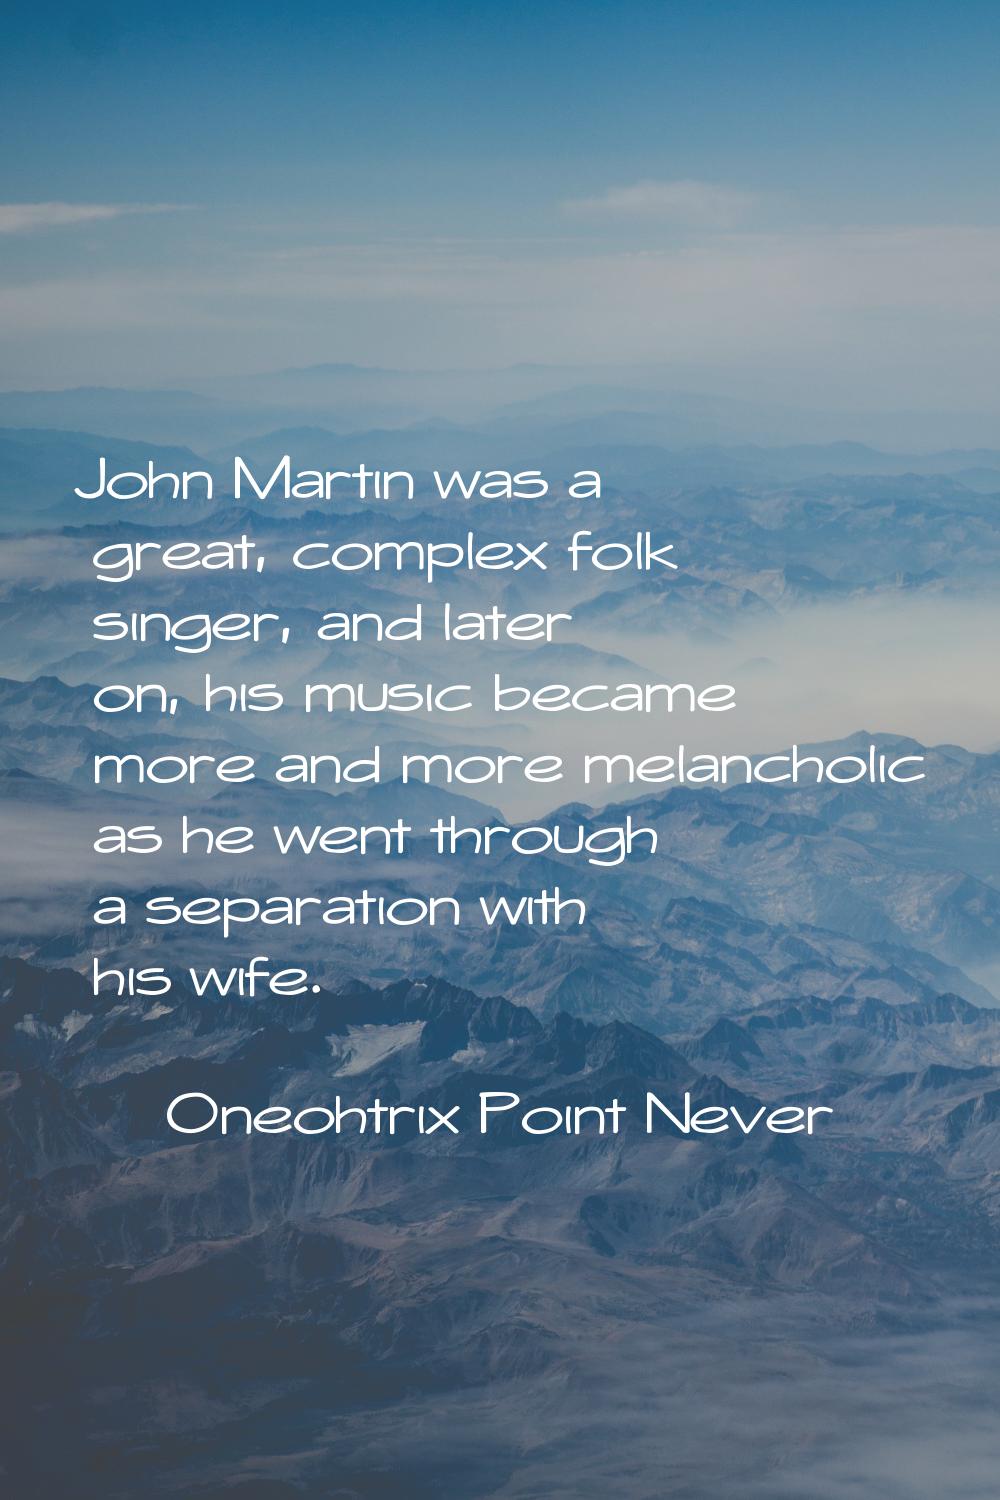 John Martin was a great, complex folk singer, and later on, his music became more and more melancho